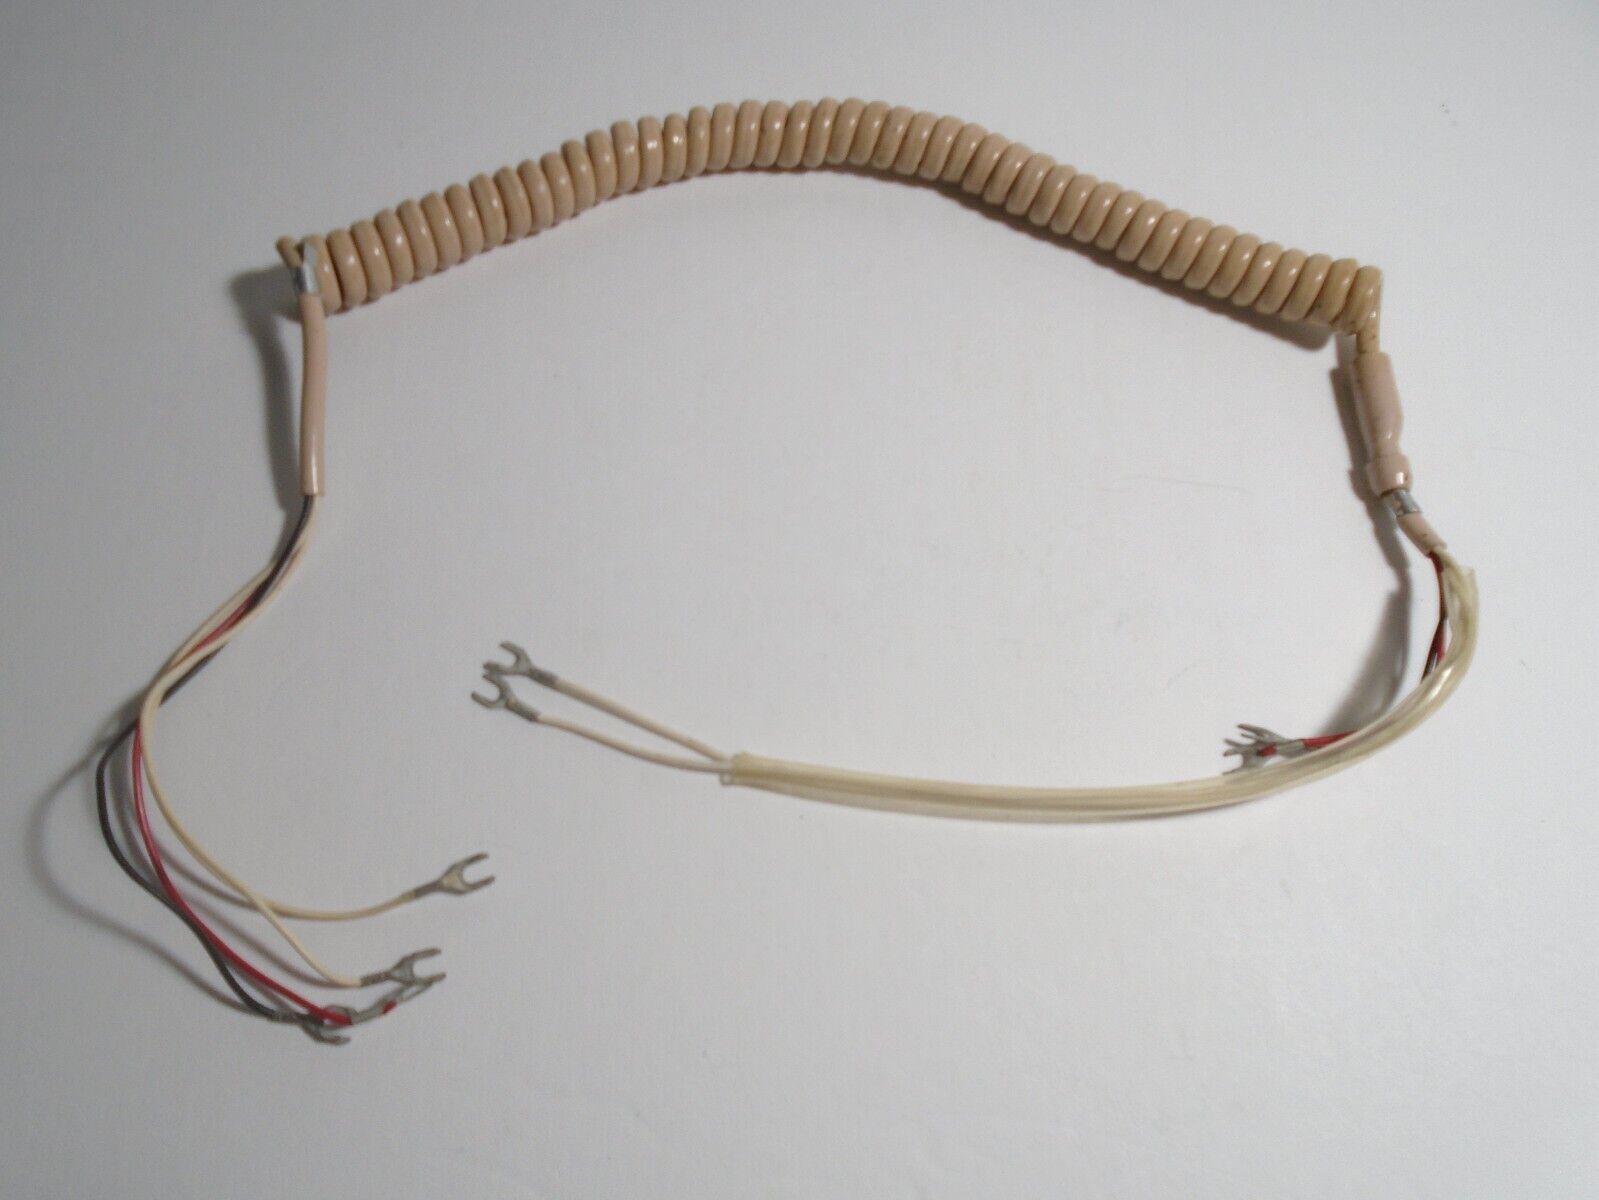 Vintage Telephone Handset Coiled Cord 4 Conductors Beige 6FT